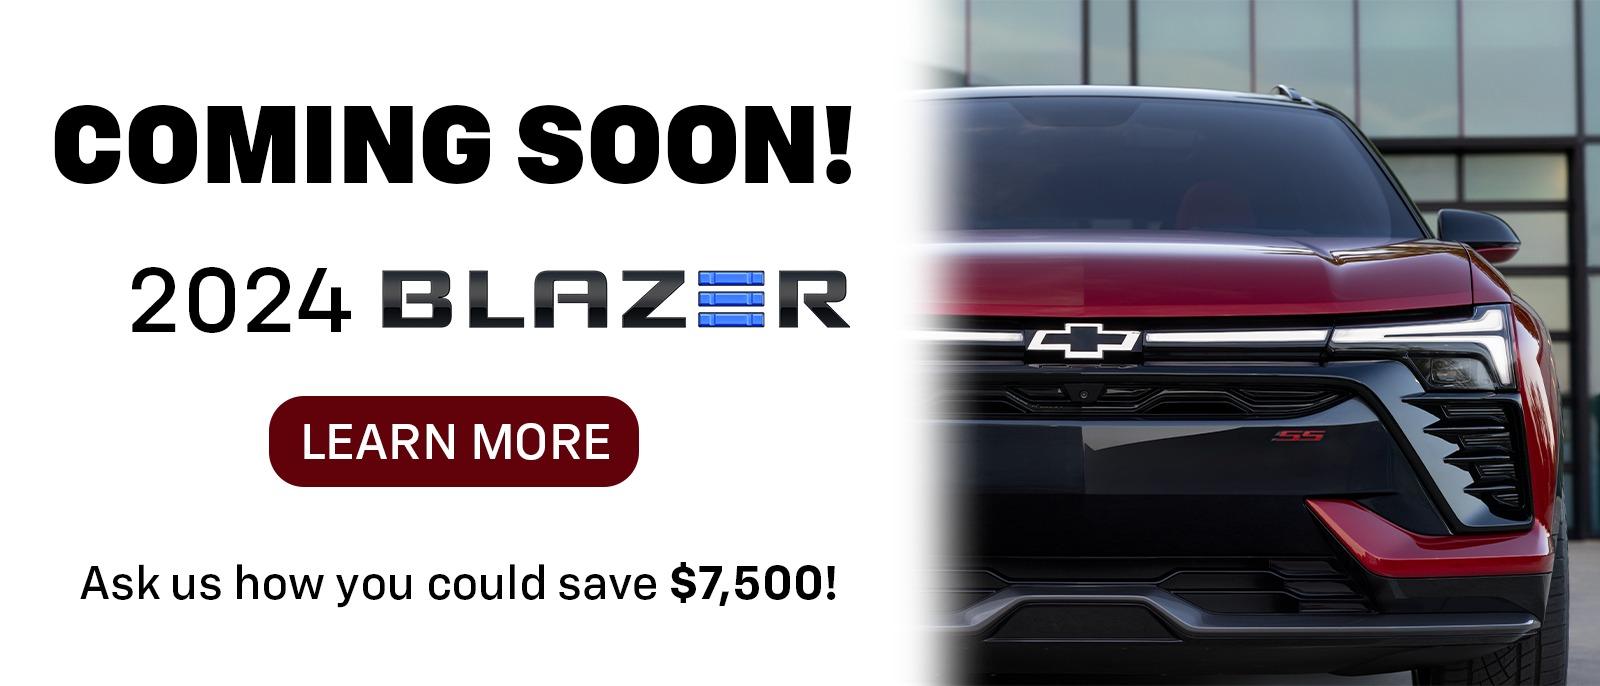 Coming Soon!
2024 Blazer
Ask us how could save $7,500!